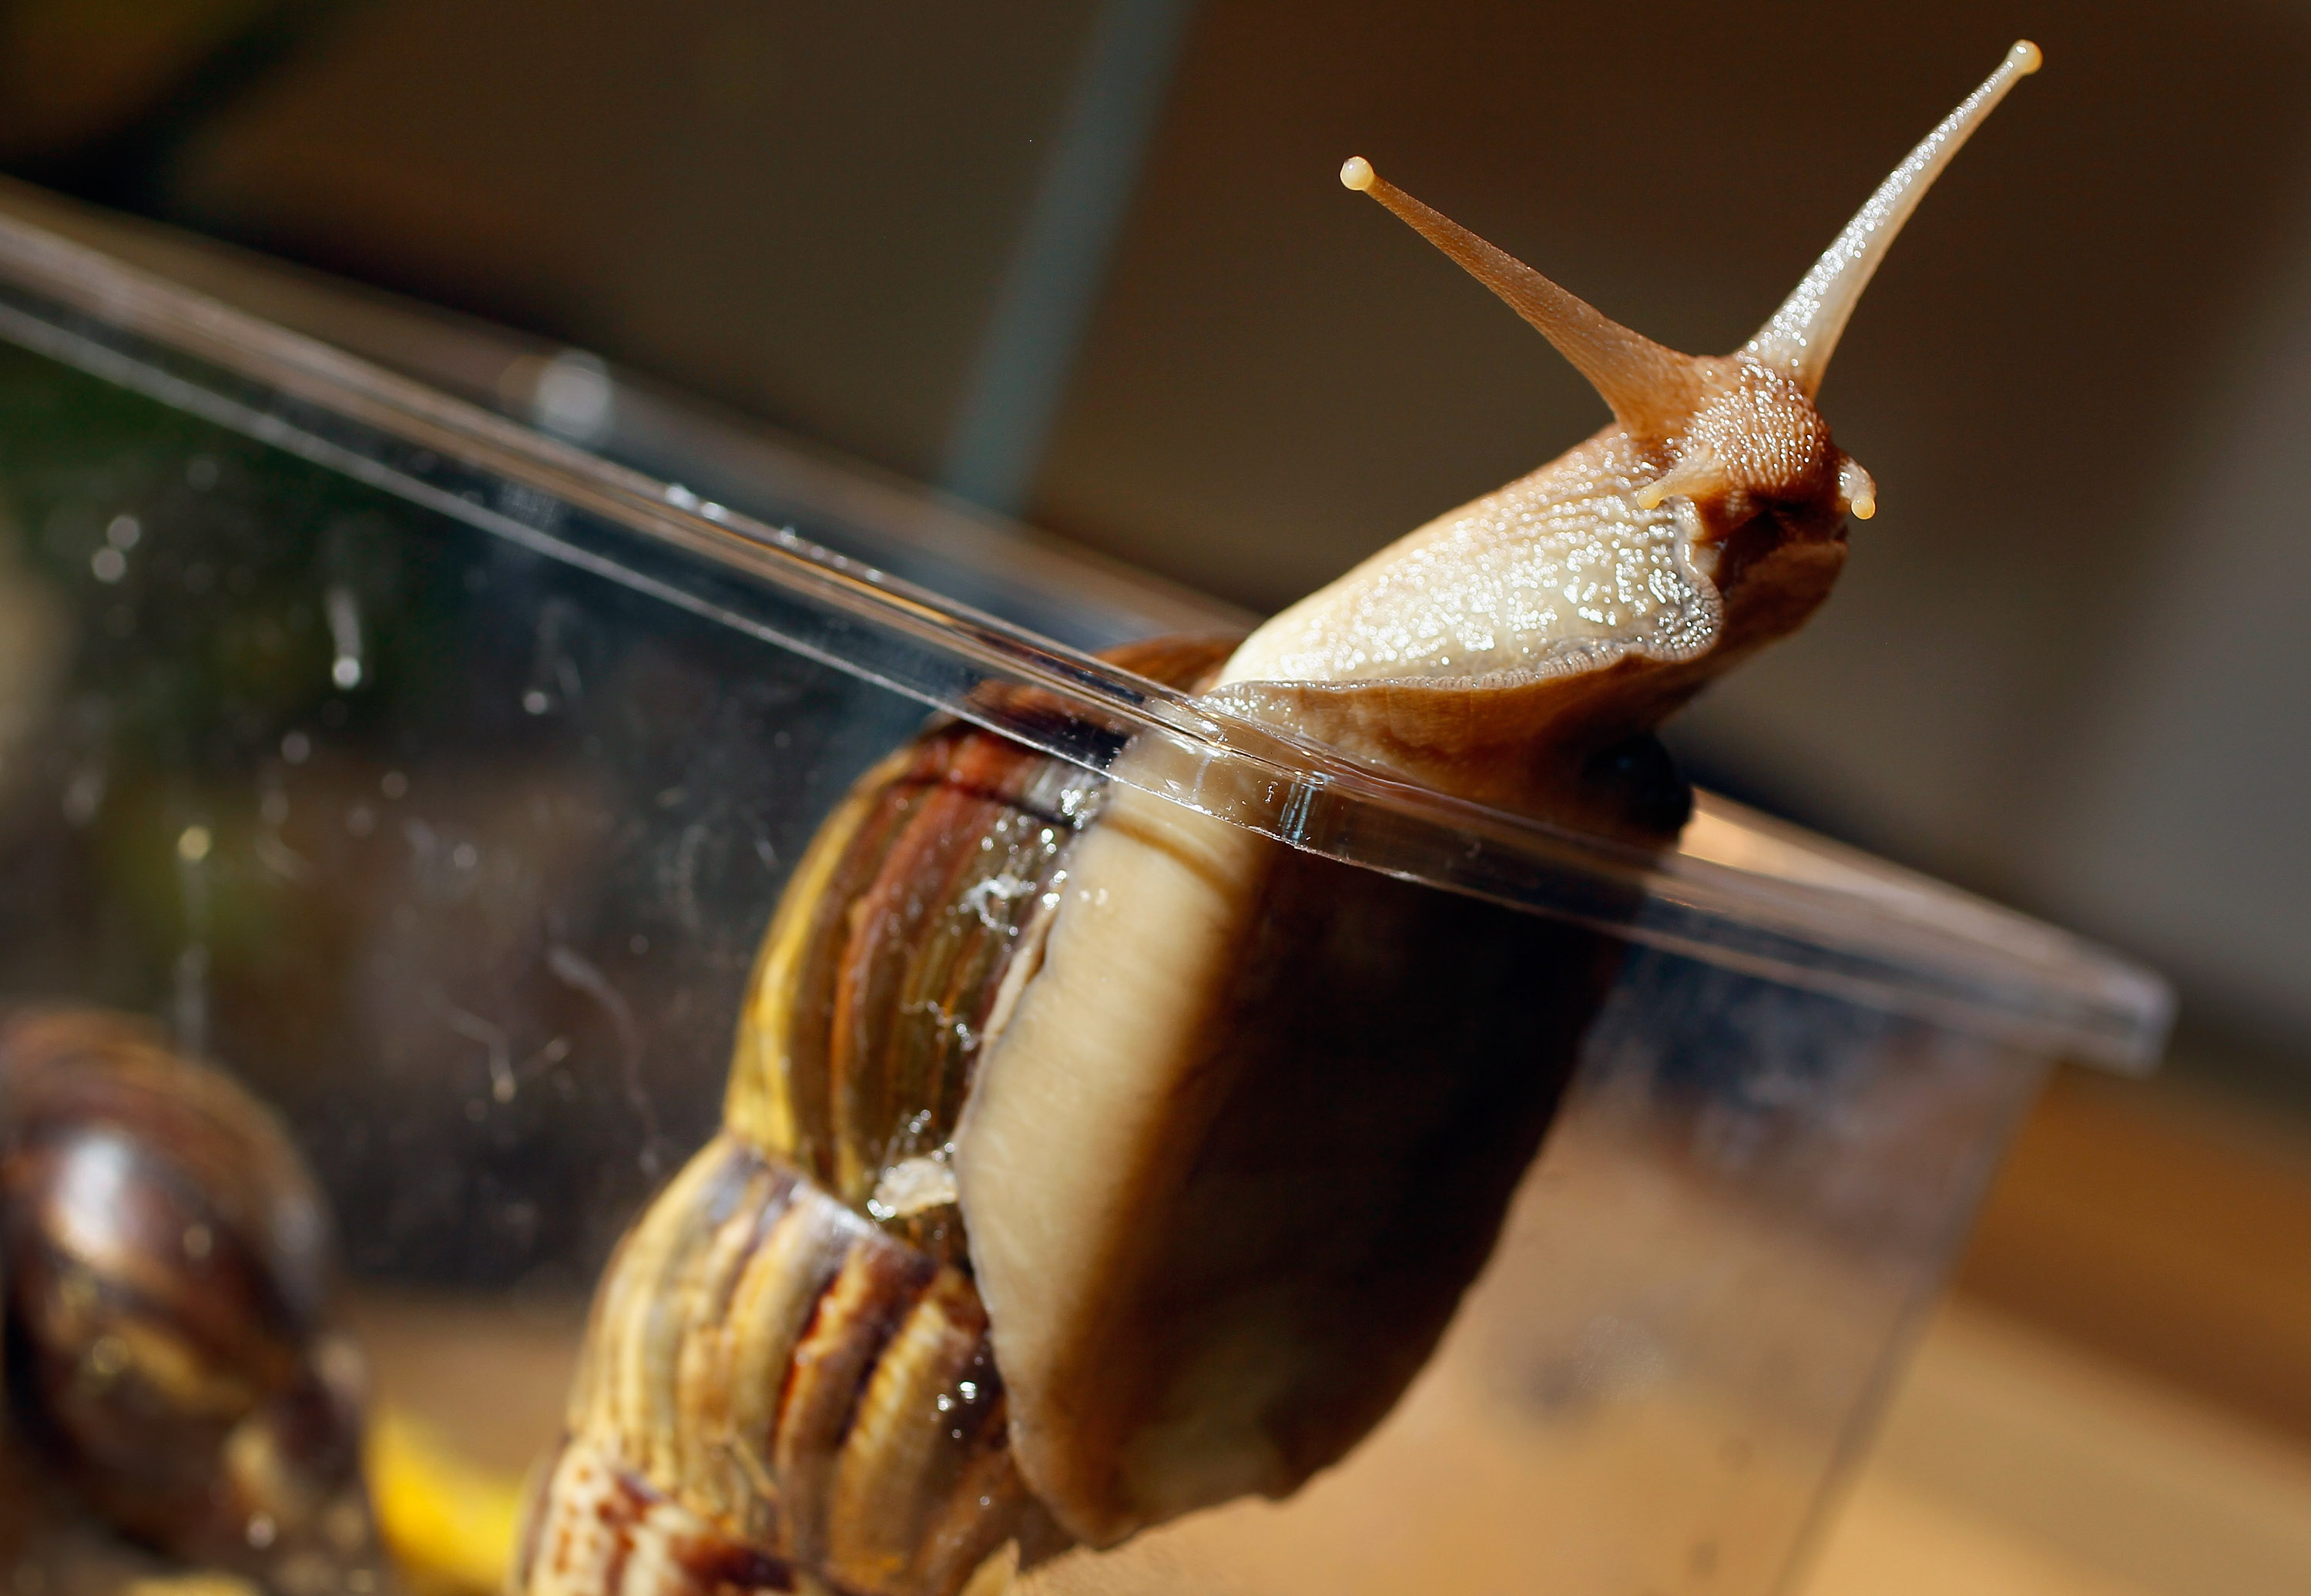 A Giant African land snail is seen as the Florida Department of Agriculture and Consumer Services announces it has positively identified a population of the invasive species in Miami-Dade County on Sept. 15, 2011. (Joe Raedle&mdash;Getty Images)